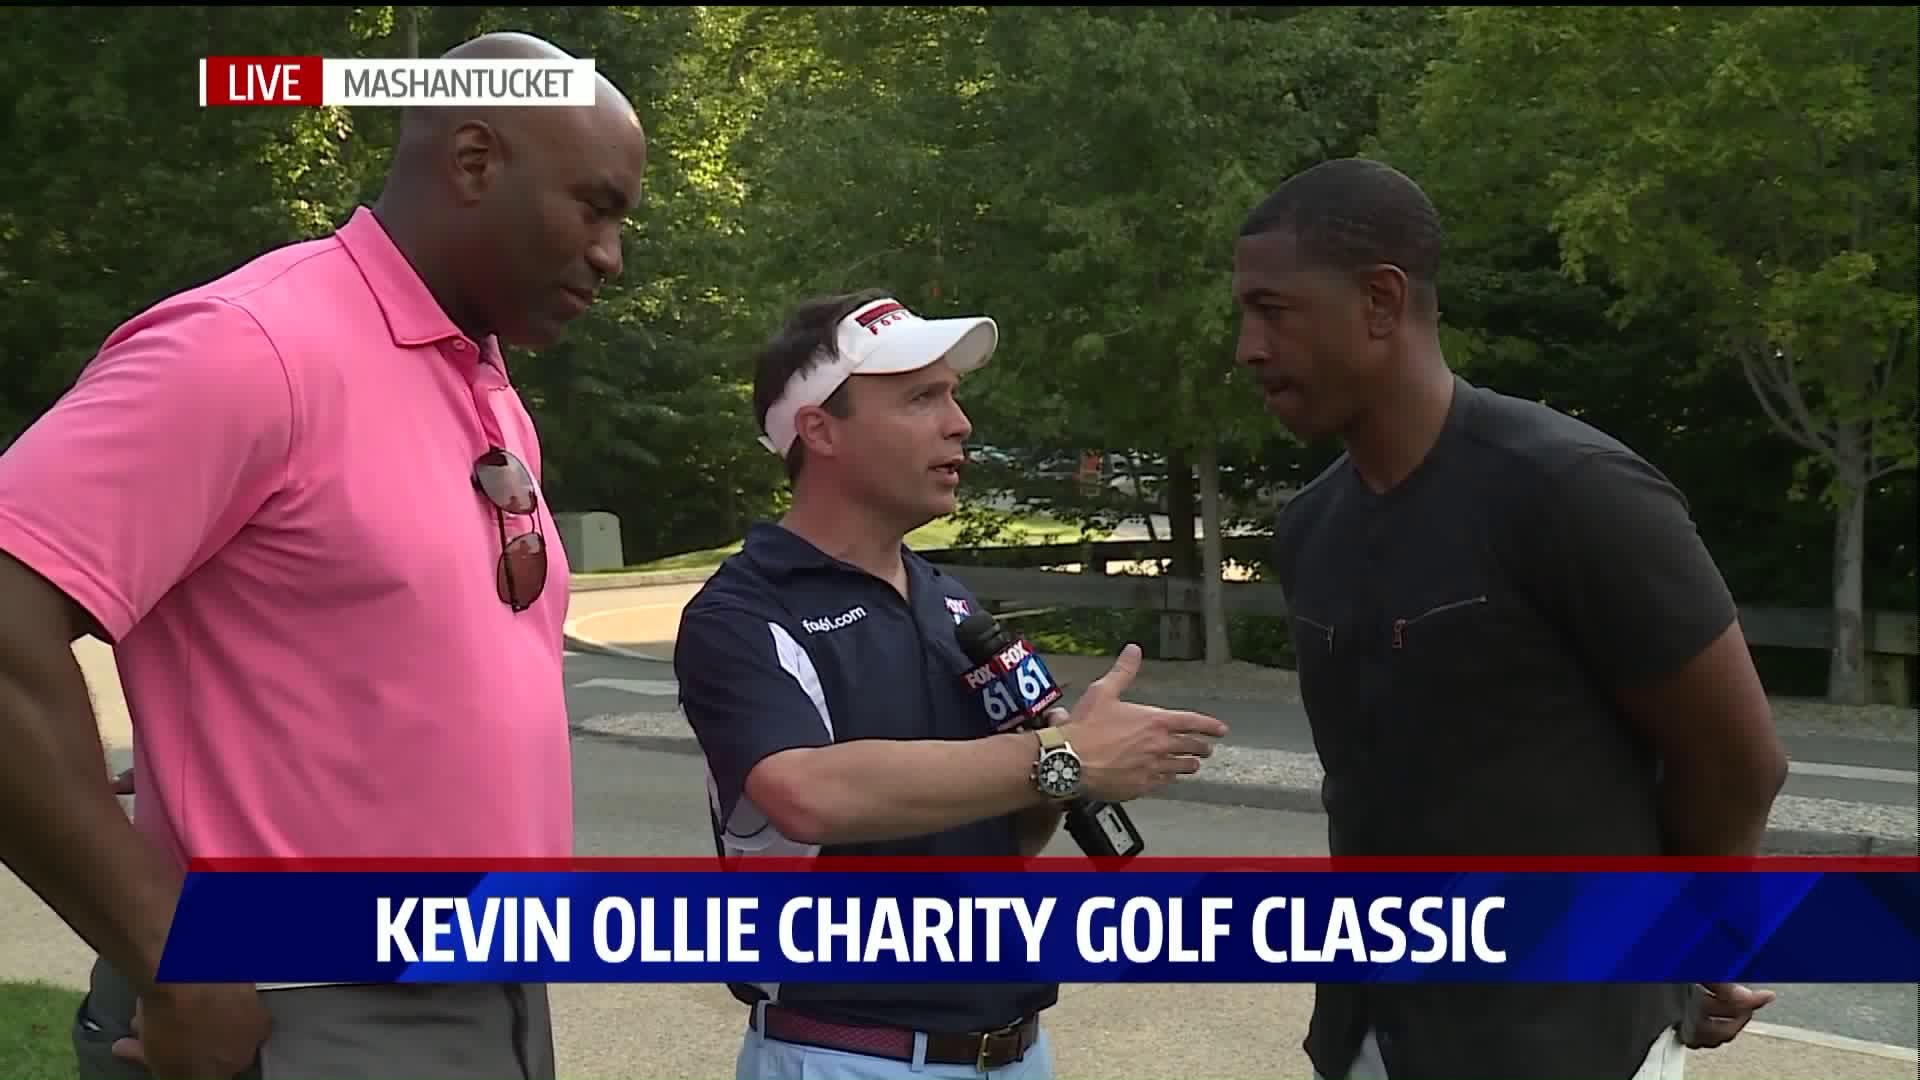 Kevin Ollie Charity Gold Classic